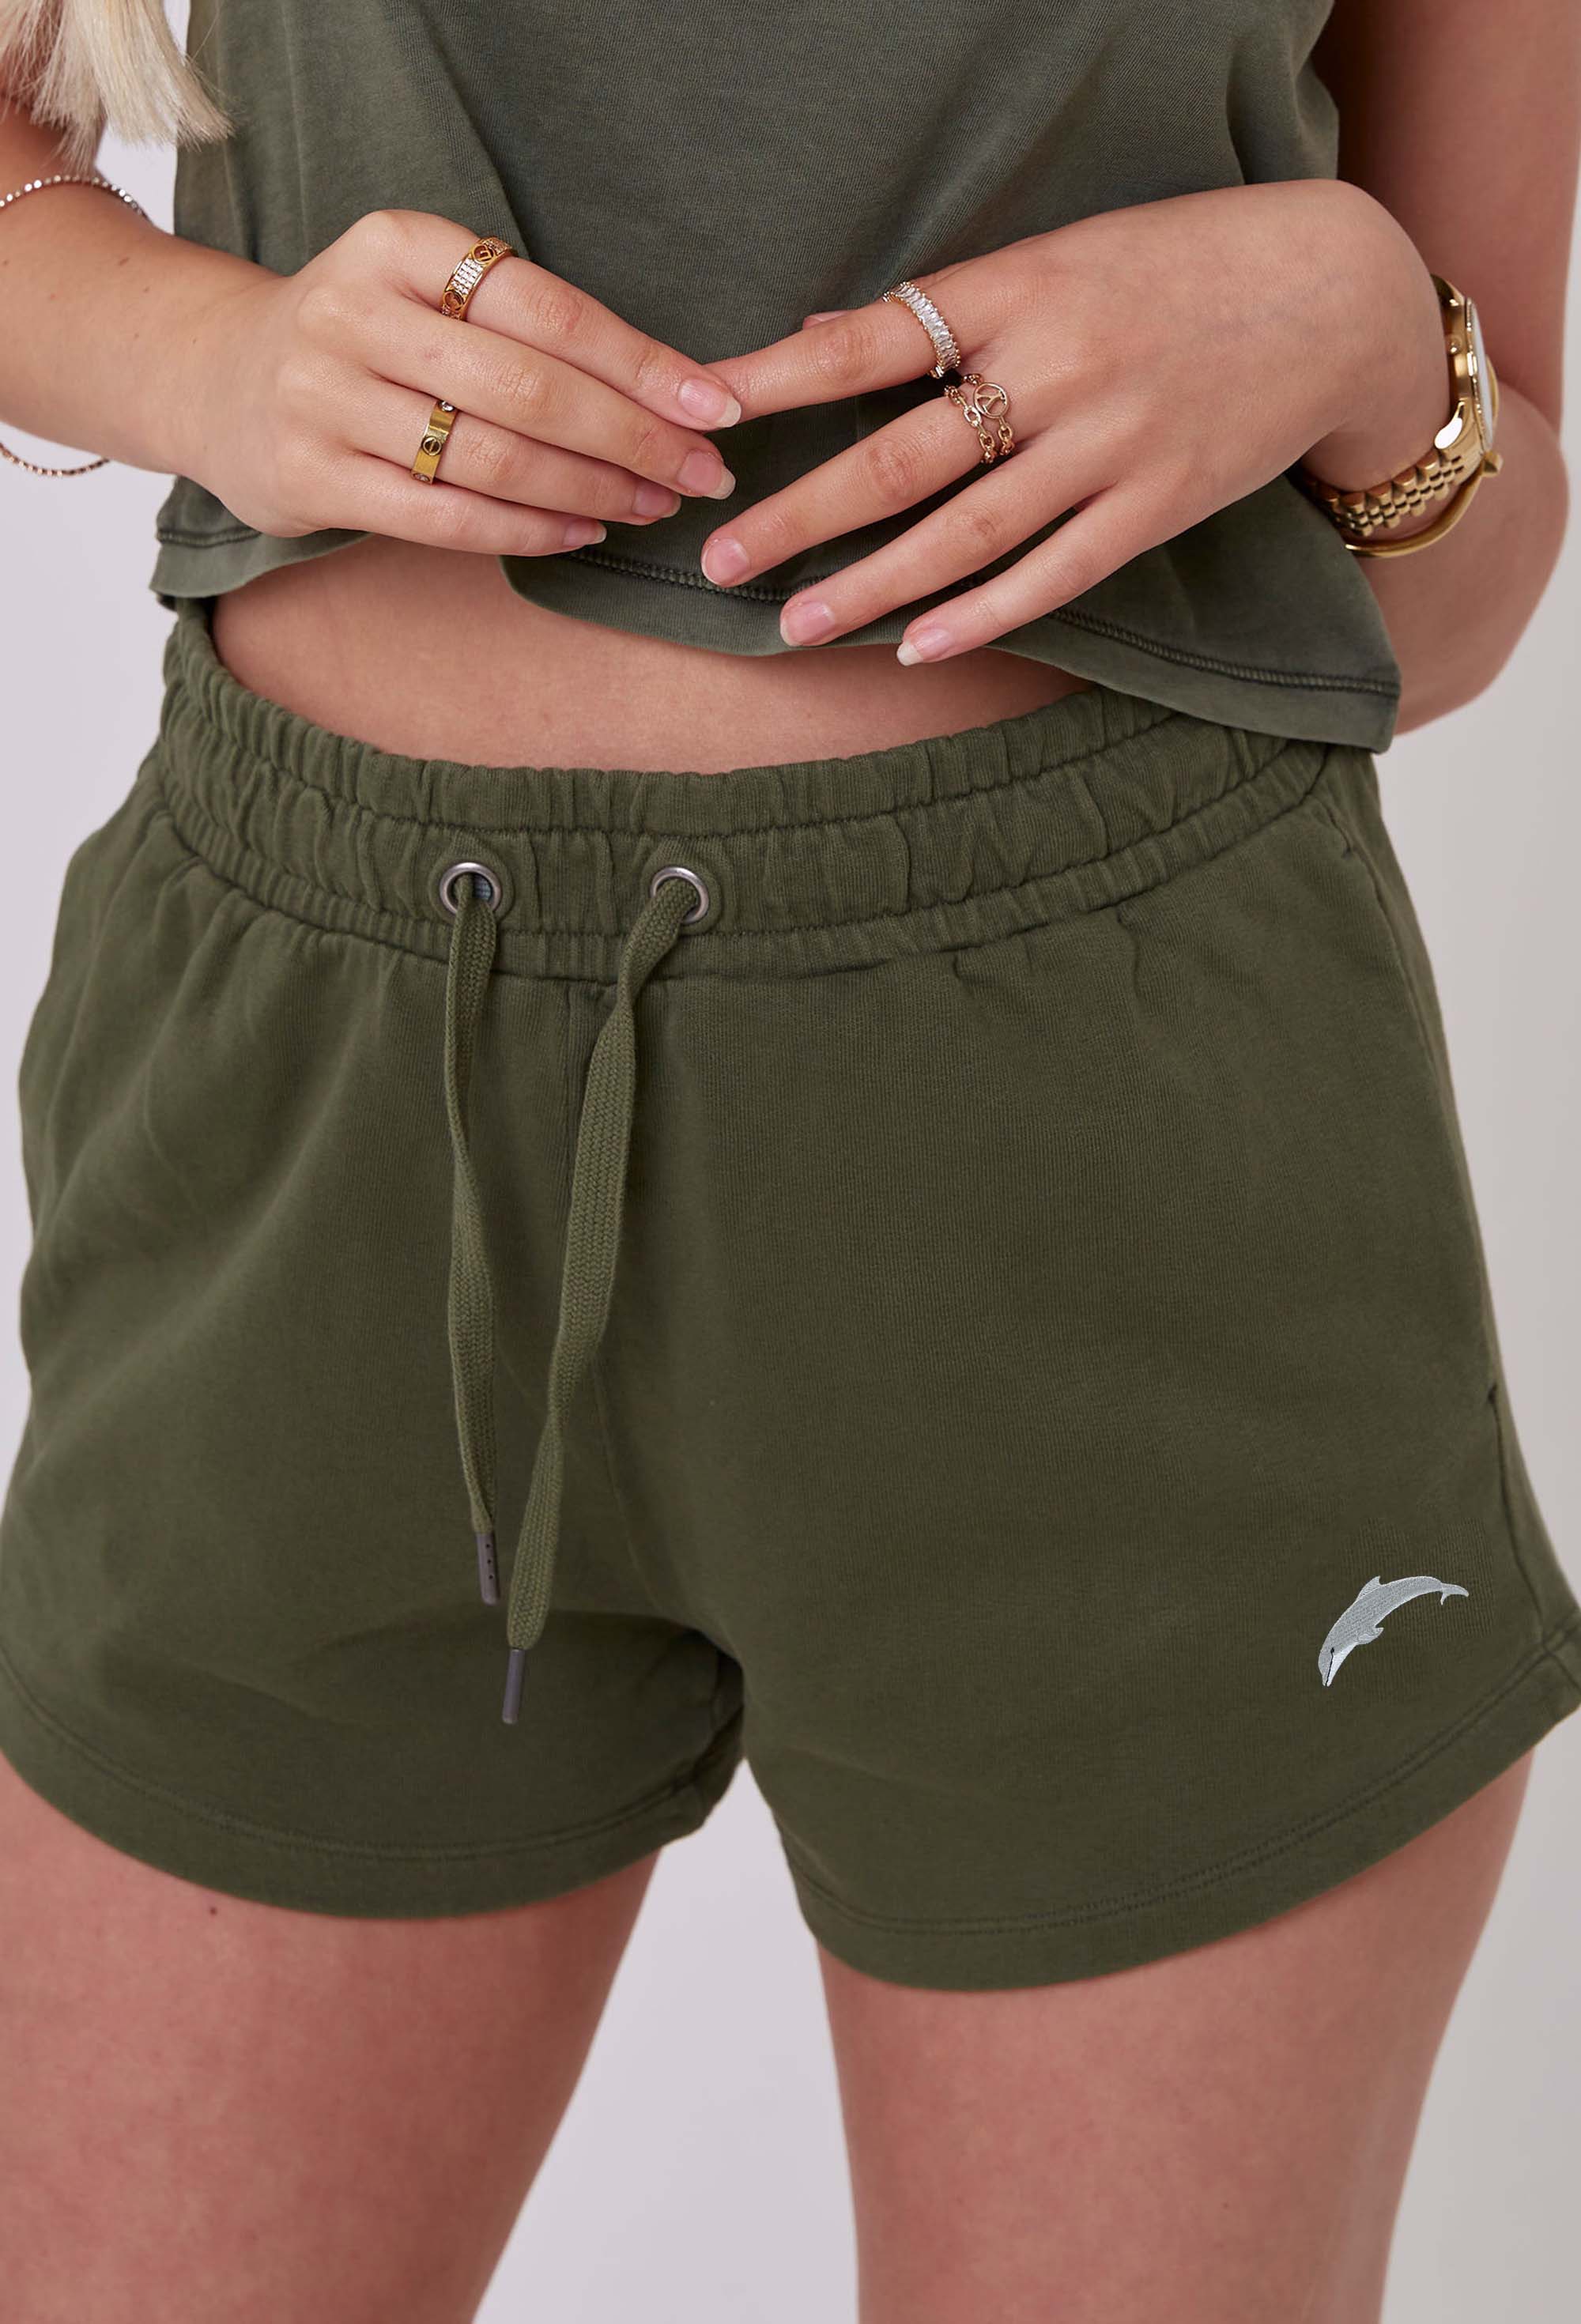 dolphin sport shorts - Big Wild Thought